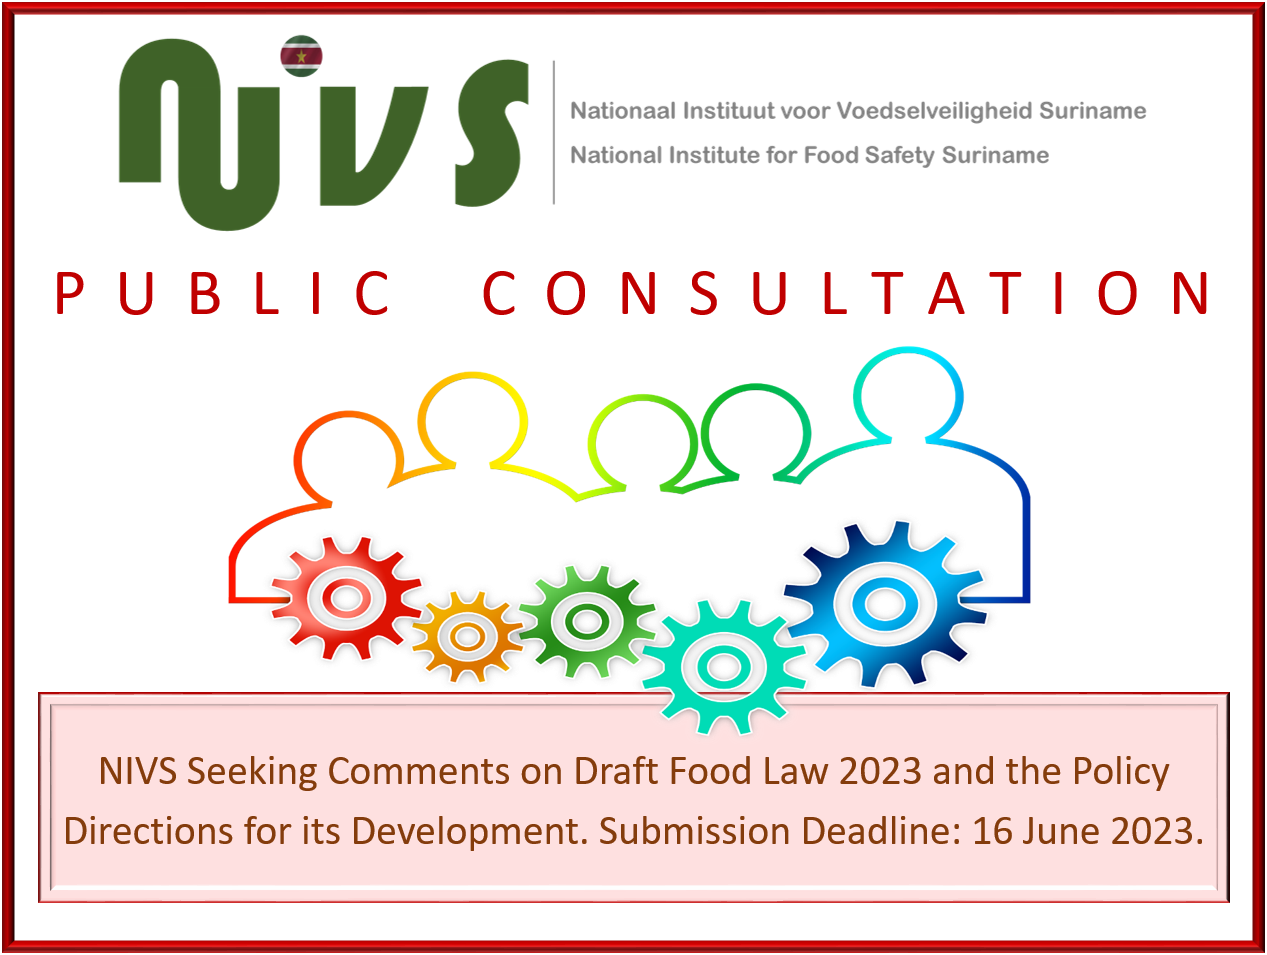 NIVS Seeking Comments on the Draft Food Law 2023 and the Policy